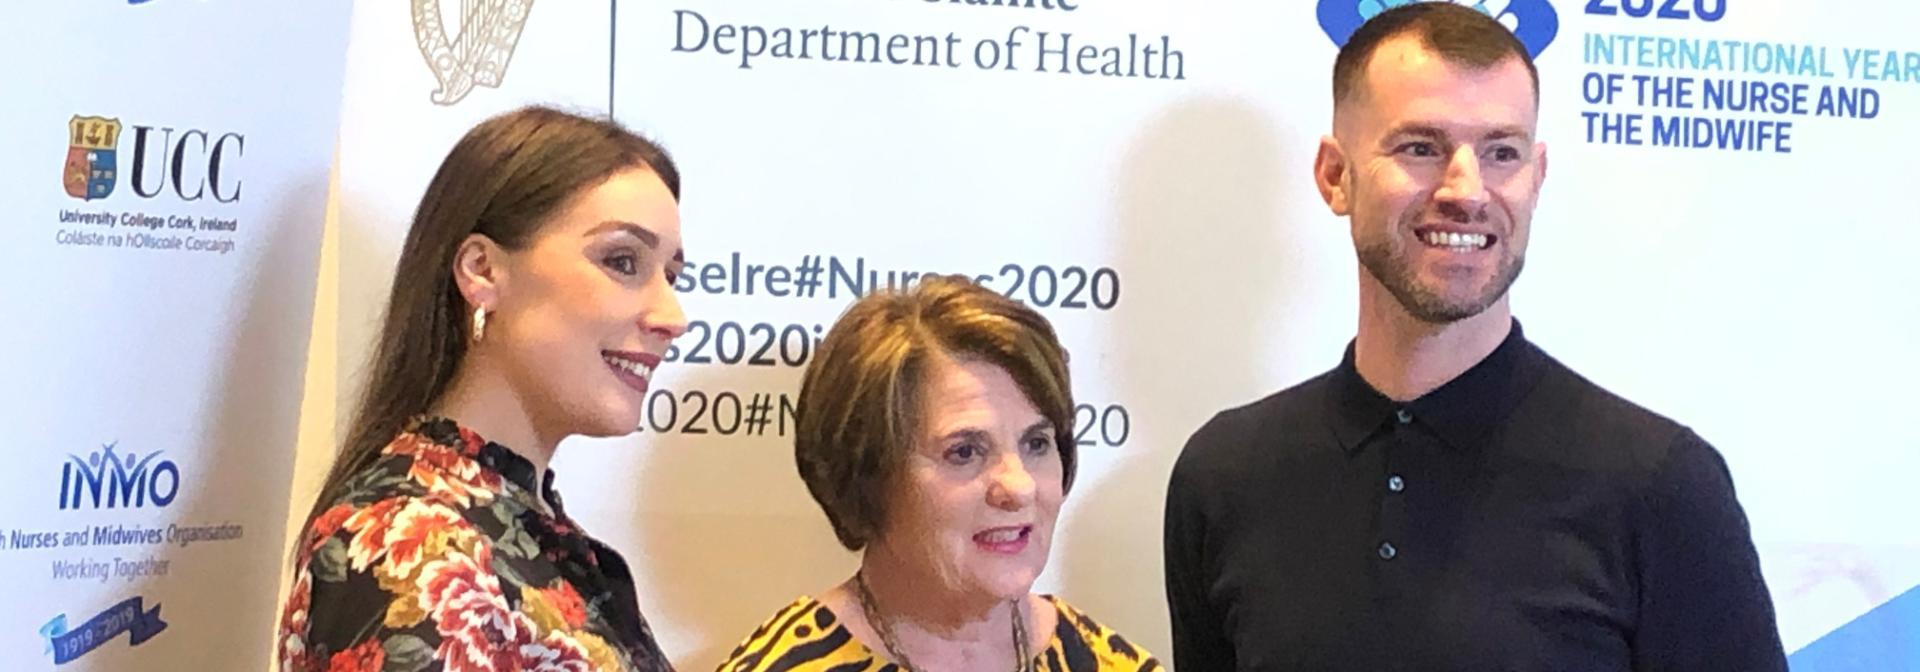 Formal launch of the international year of the nurse and midwife 2020 in Ireland in the Department of Health on the 23rd January 2020.